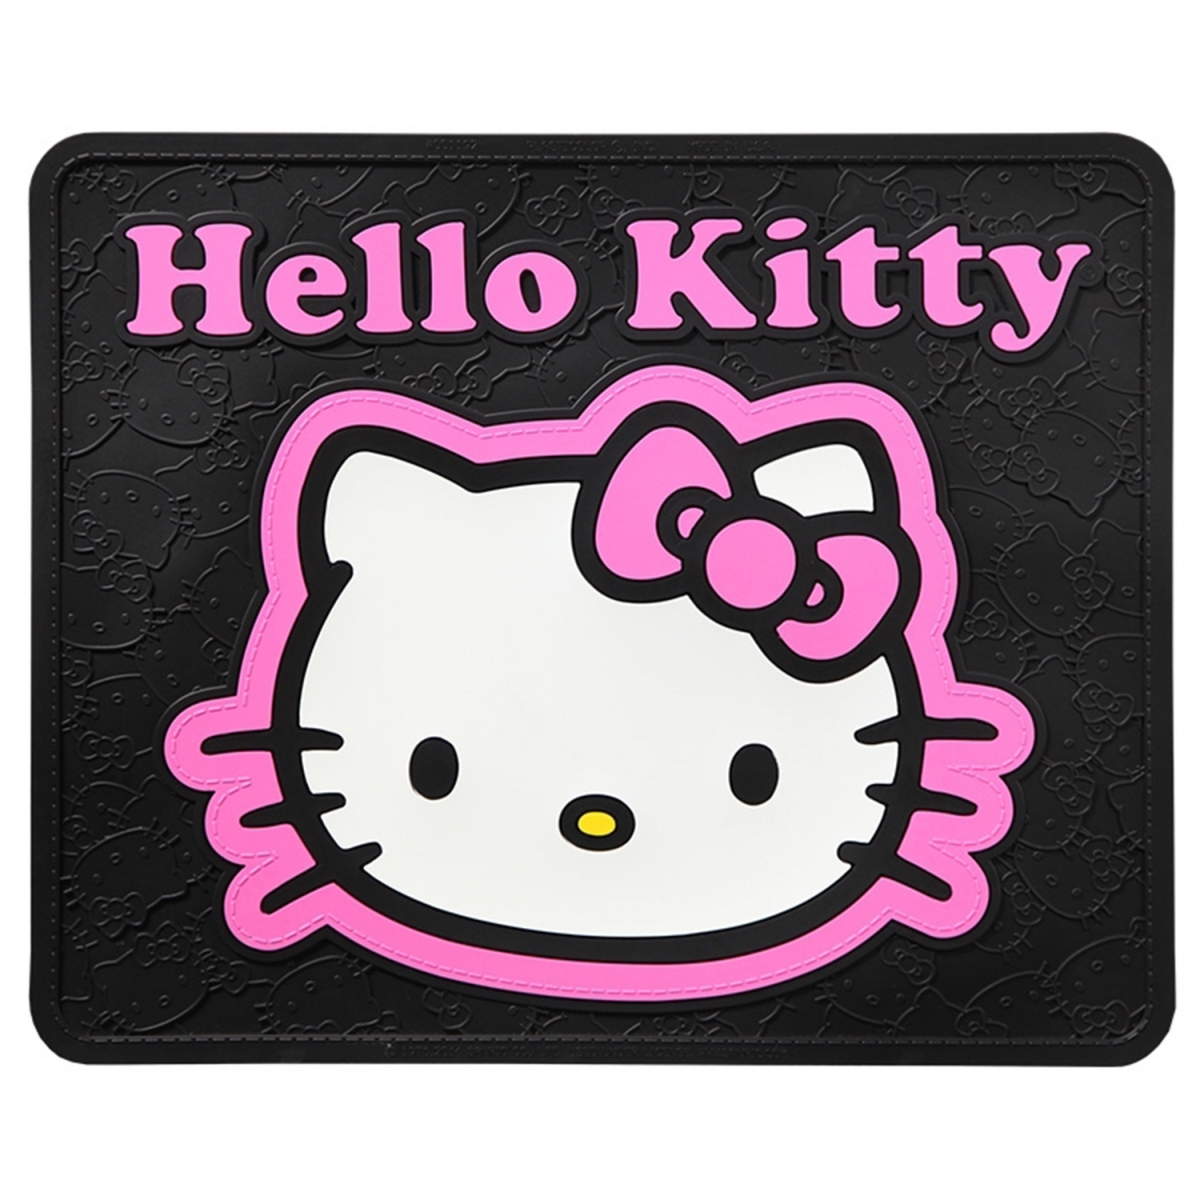 Picture of Hello Kitty 863905 Hello Kitty Classic Look Utility Rear Car Rubber Mat